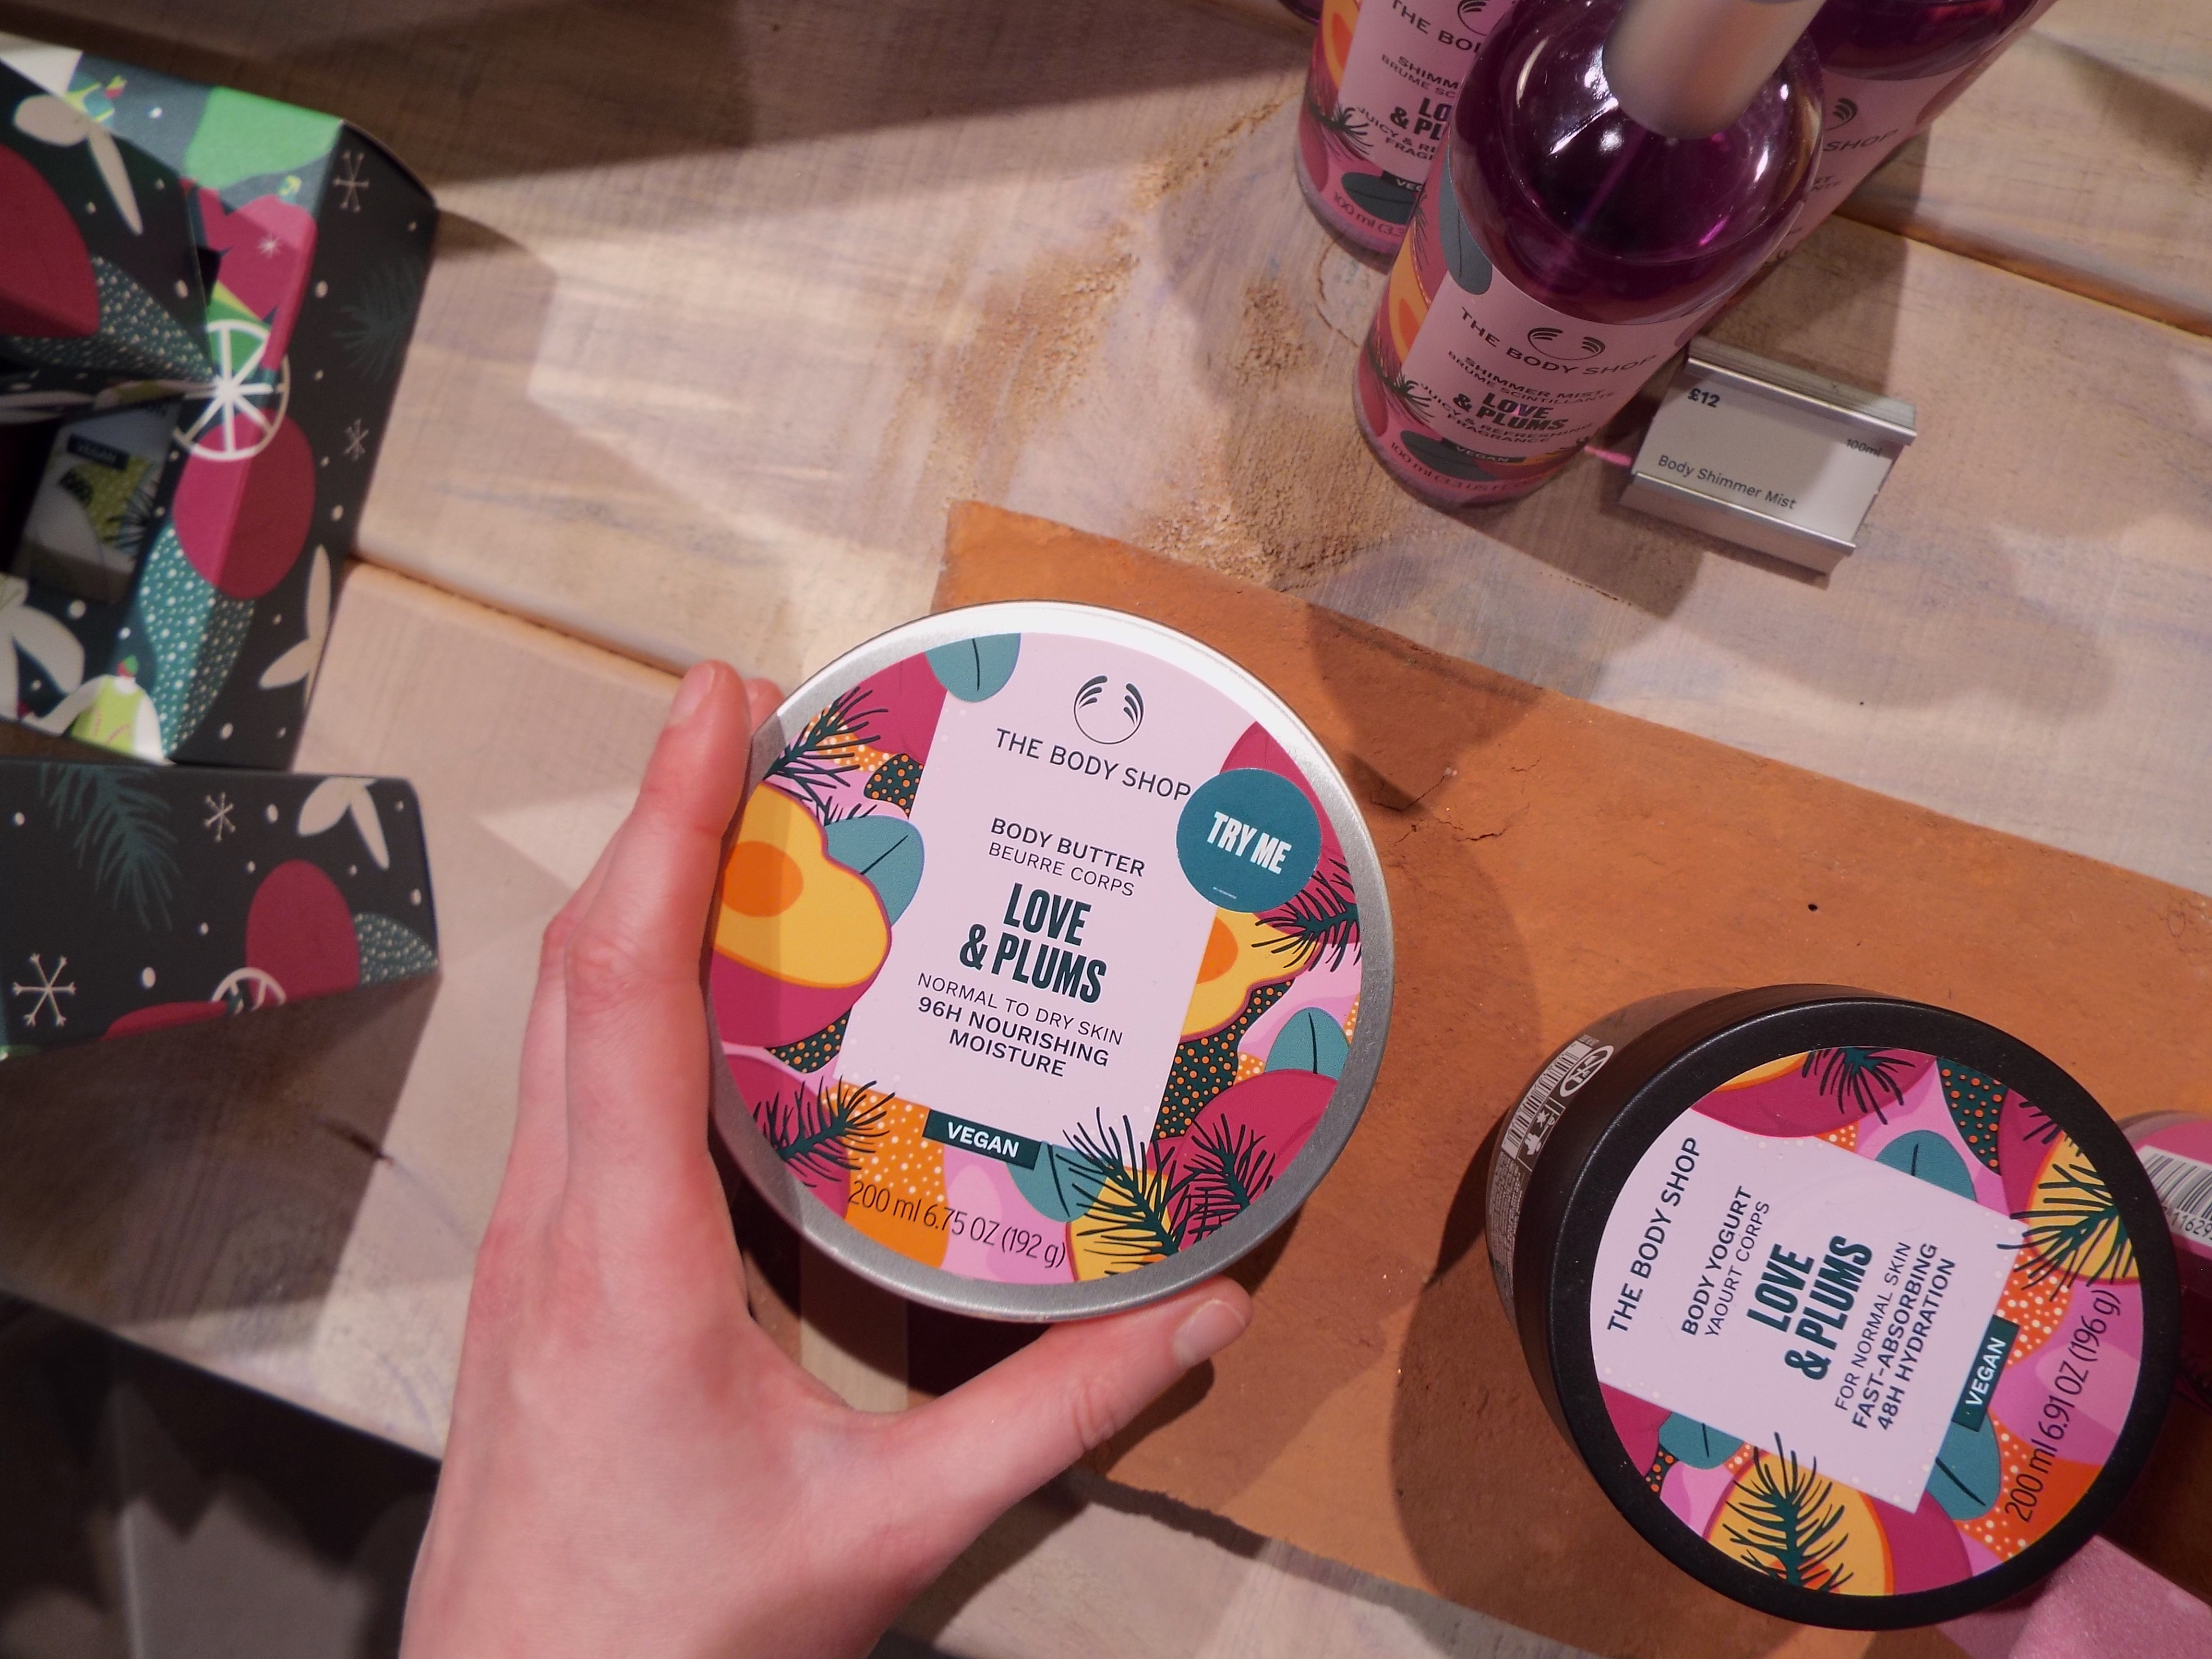 Me holding a tub of the Love and Plums Body Butter amongst the display on the wooden display unit.